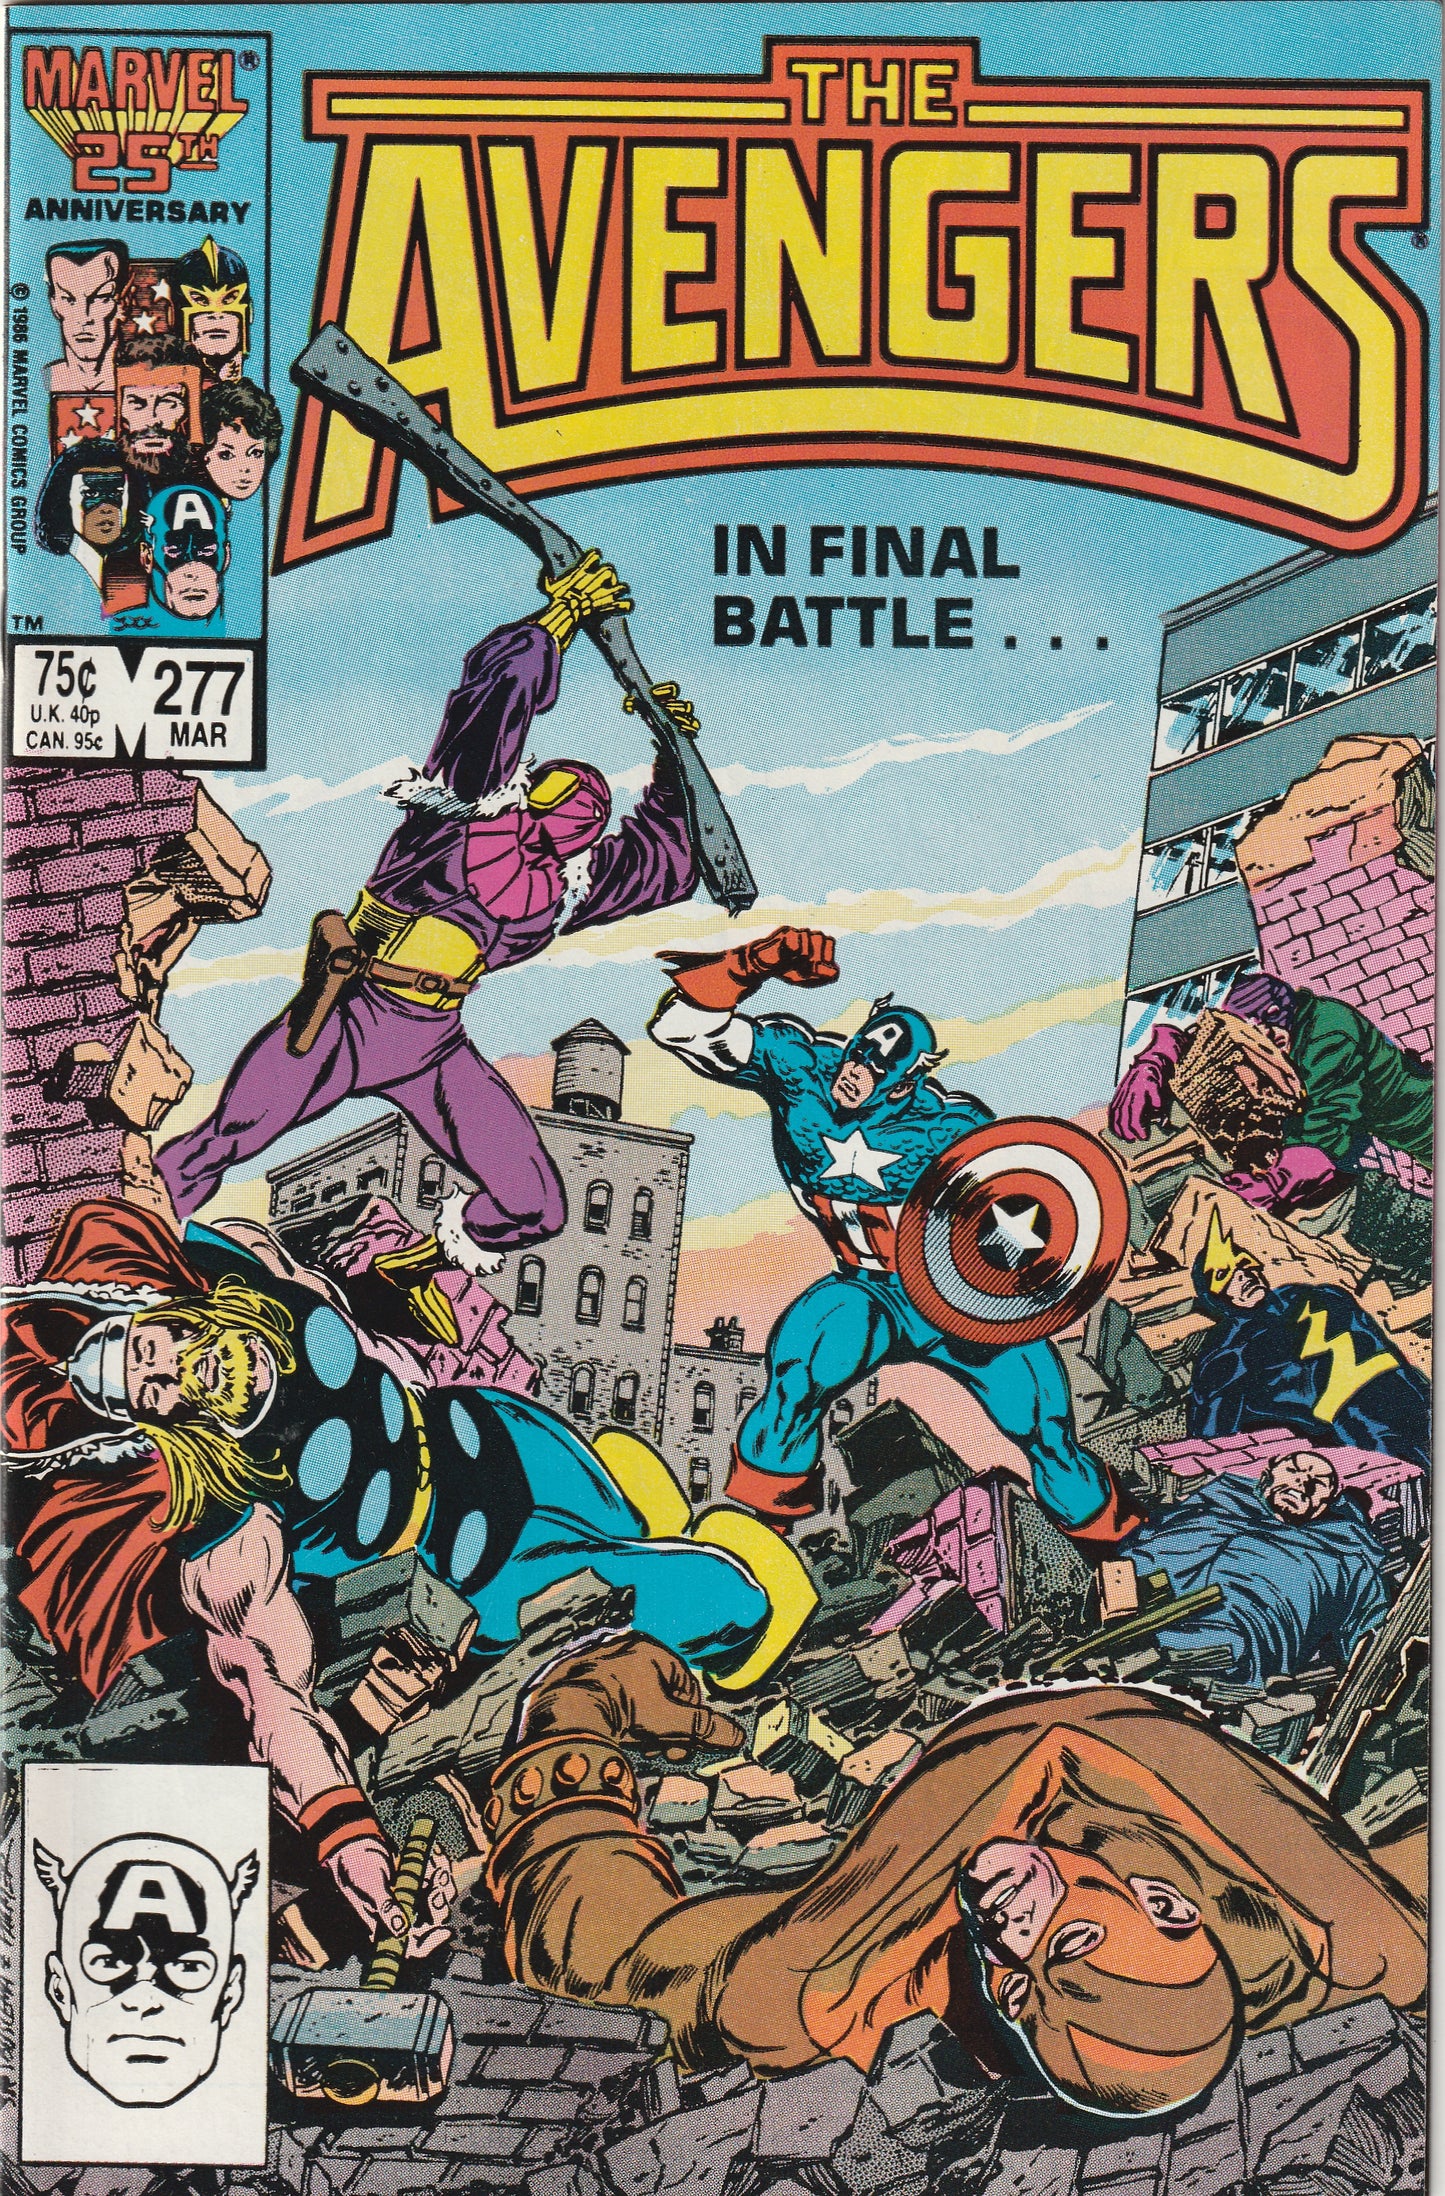 Avengers #277 (1987) - Masters of Evil defeated by Avengers